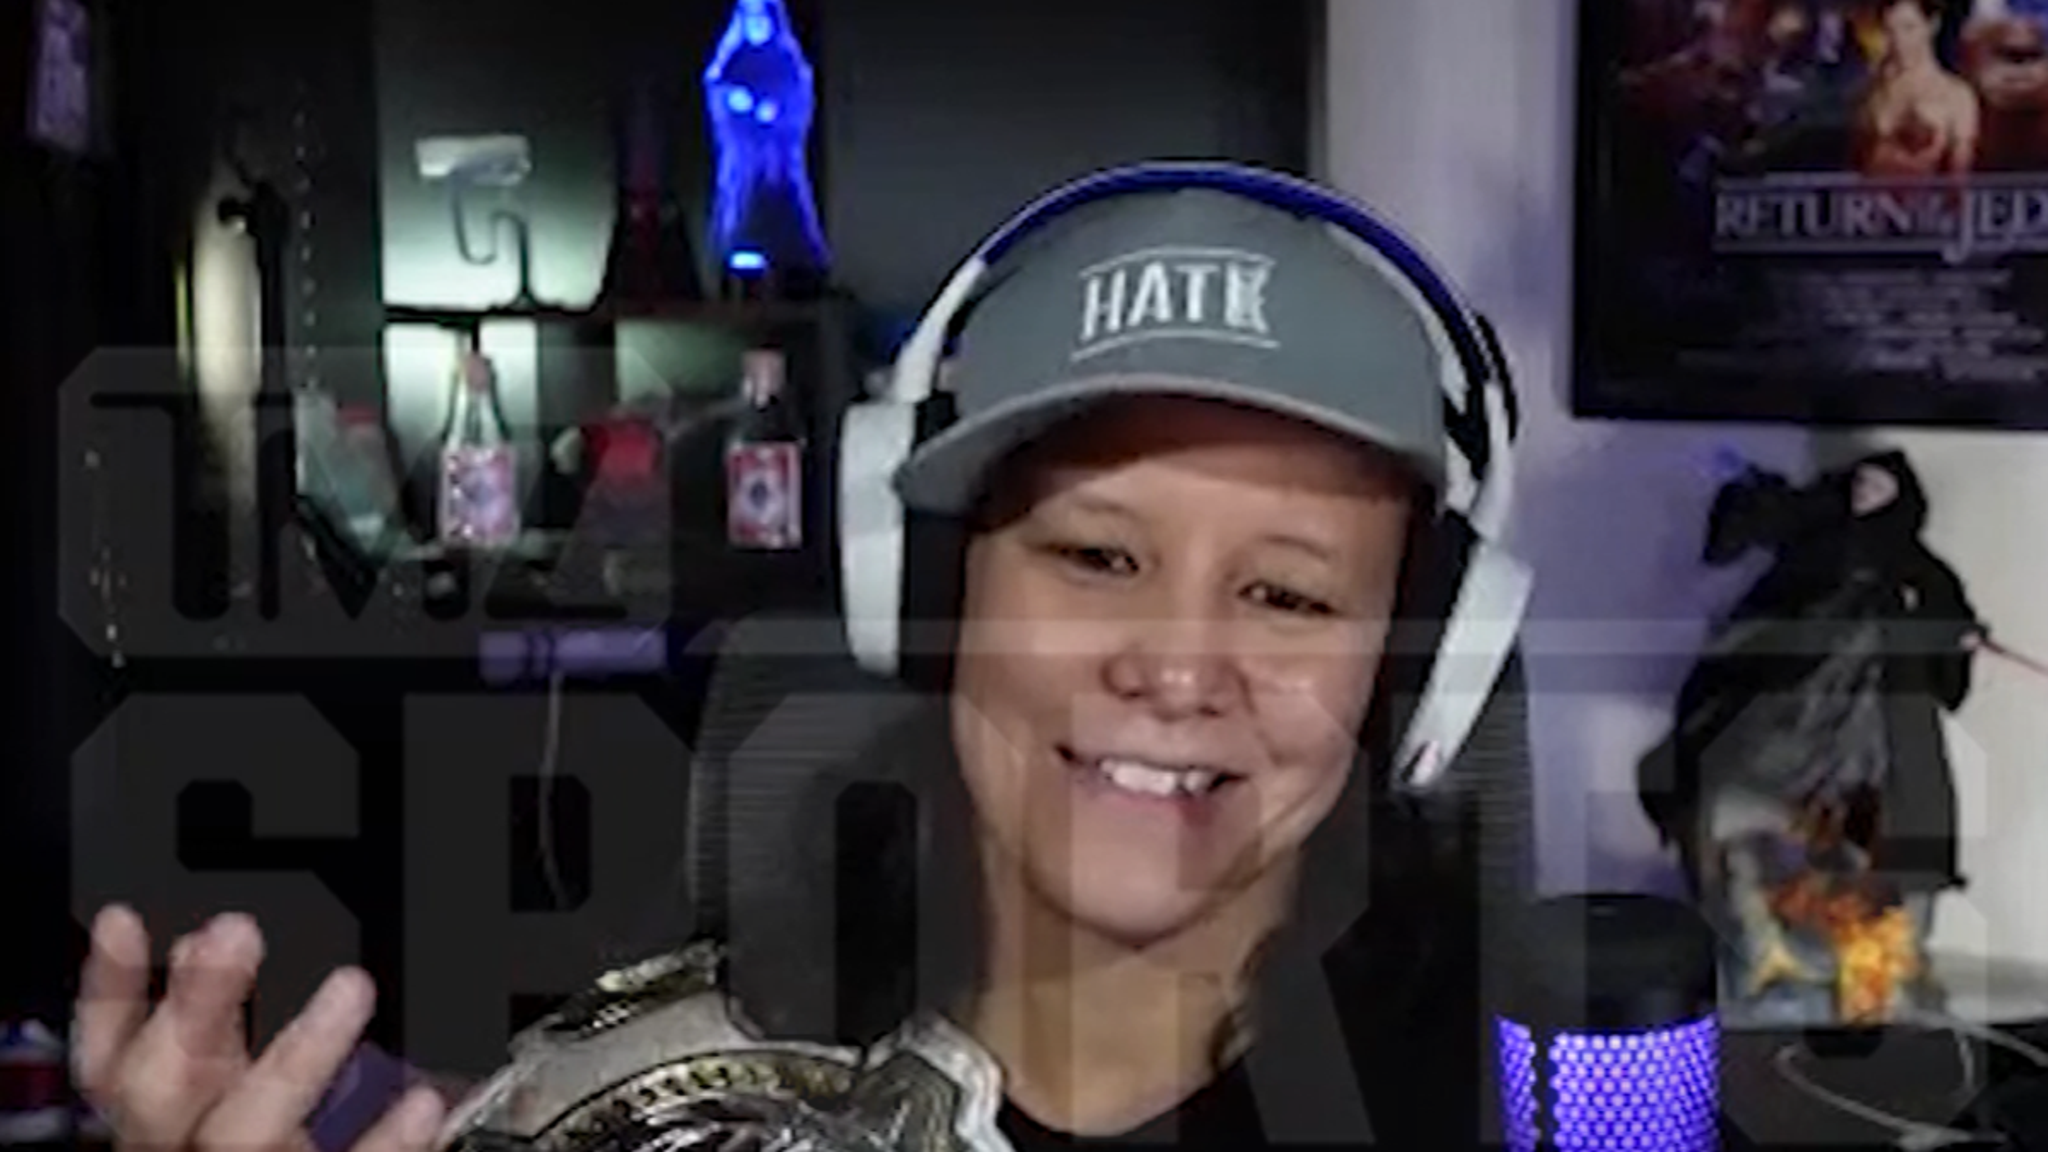 Shayna Baszler Gets Emotional Talking Tag Team Title Win W/ BFF Ronda Rousey